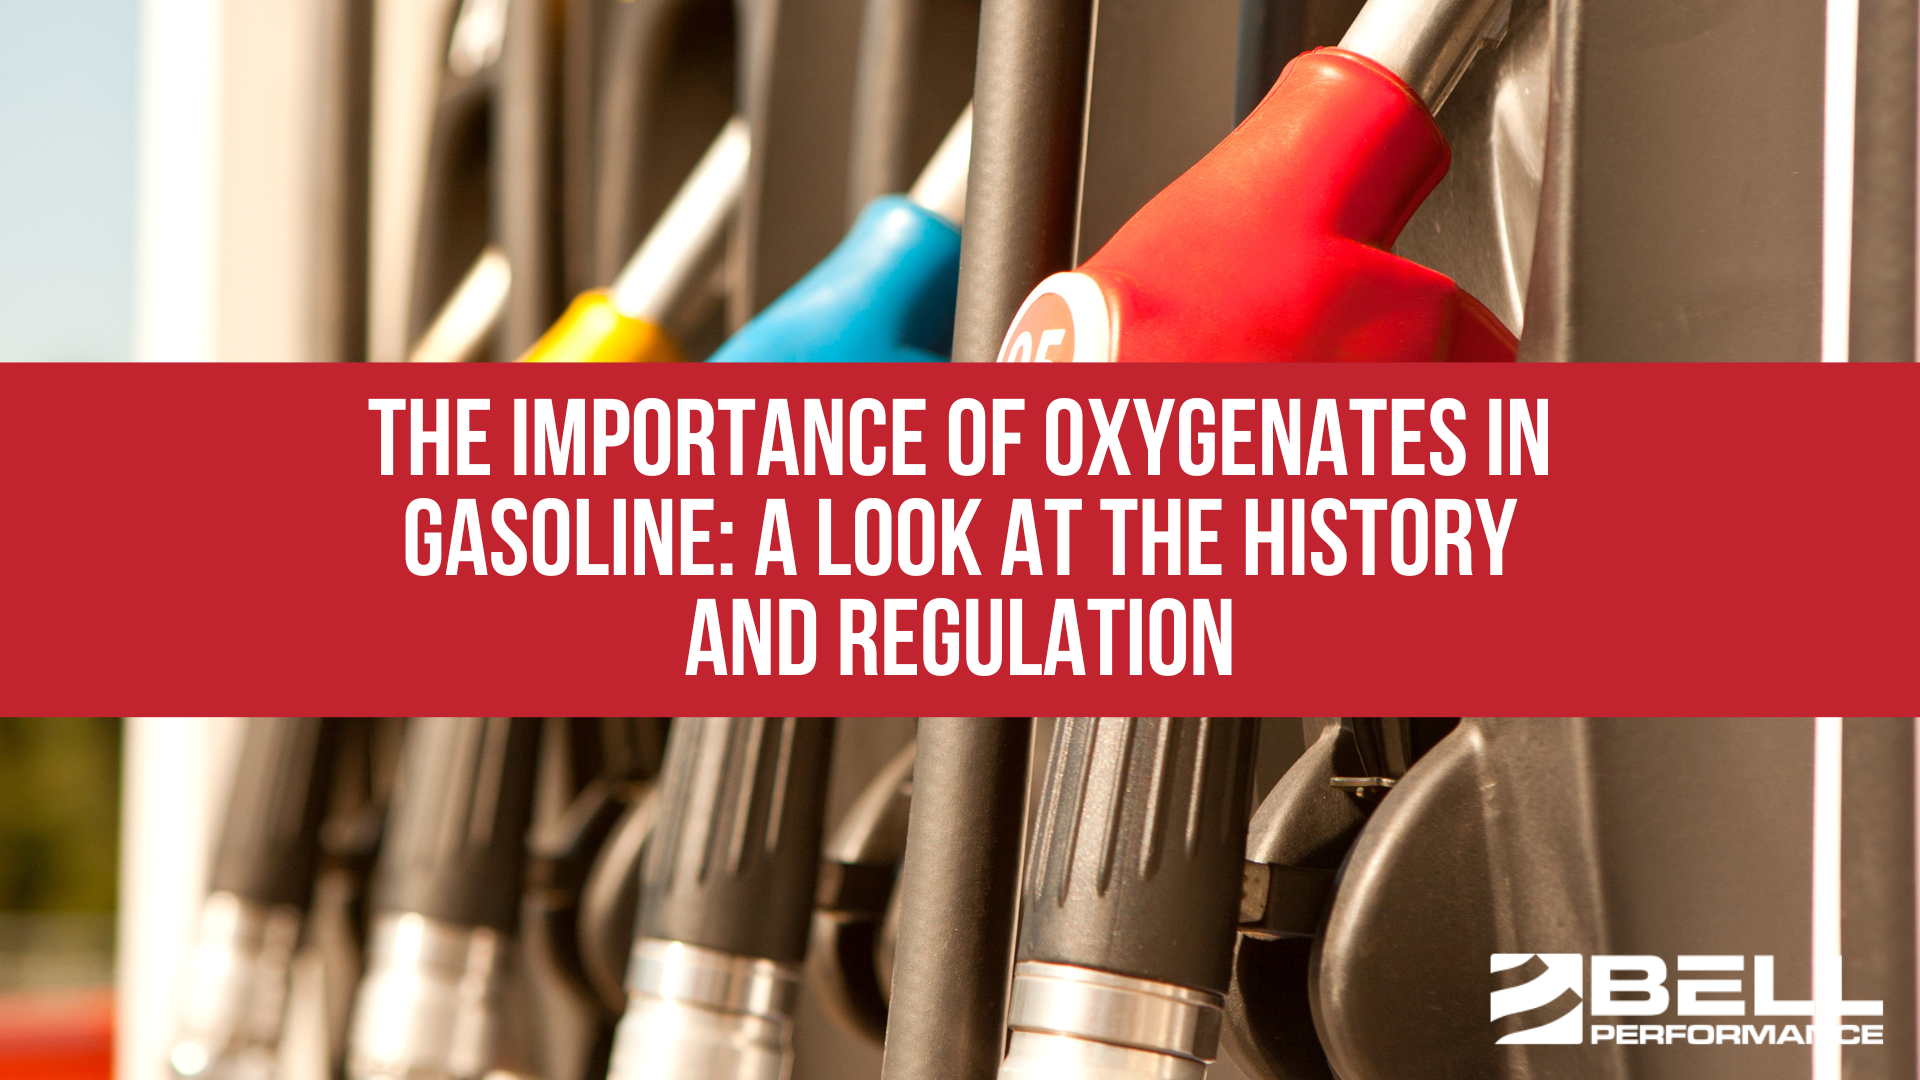 The Importance of Oxygenates in Gasoline: A Look at the History and Regulation